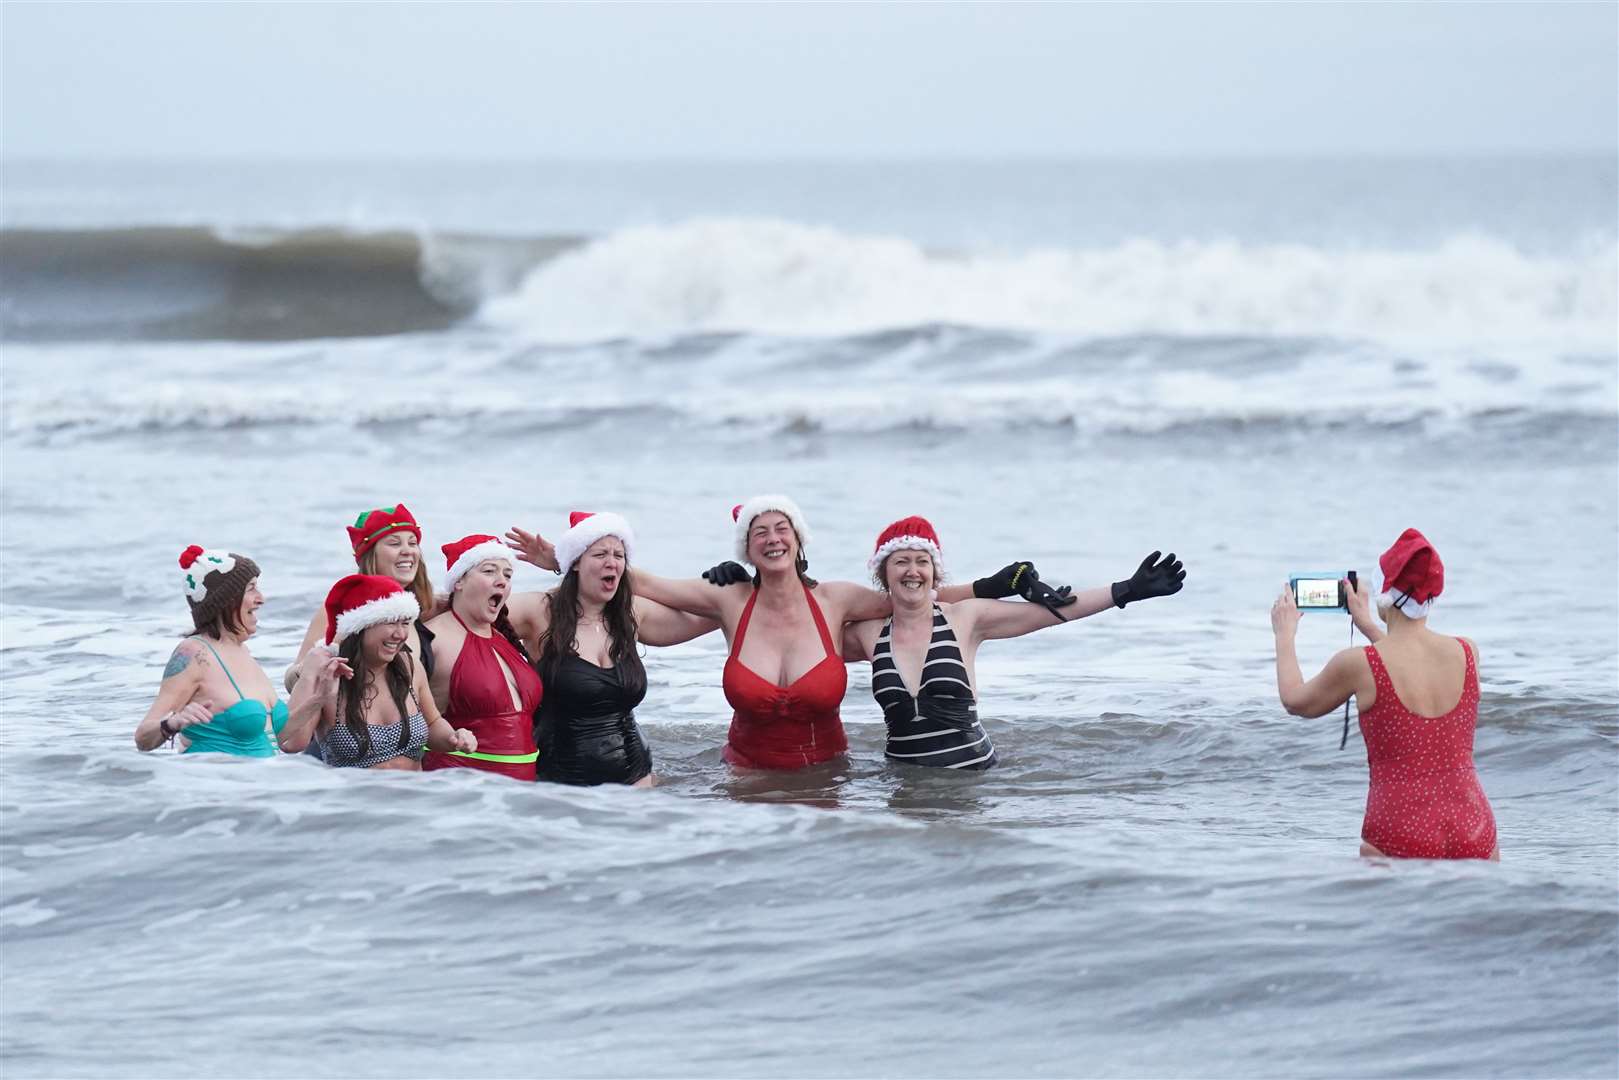 Swimmers pose for a photo as they take part in the Christmas Day swim at Tynemouth, North Tyneside (Owen Humphreys/PA)